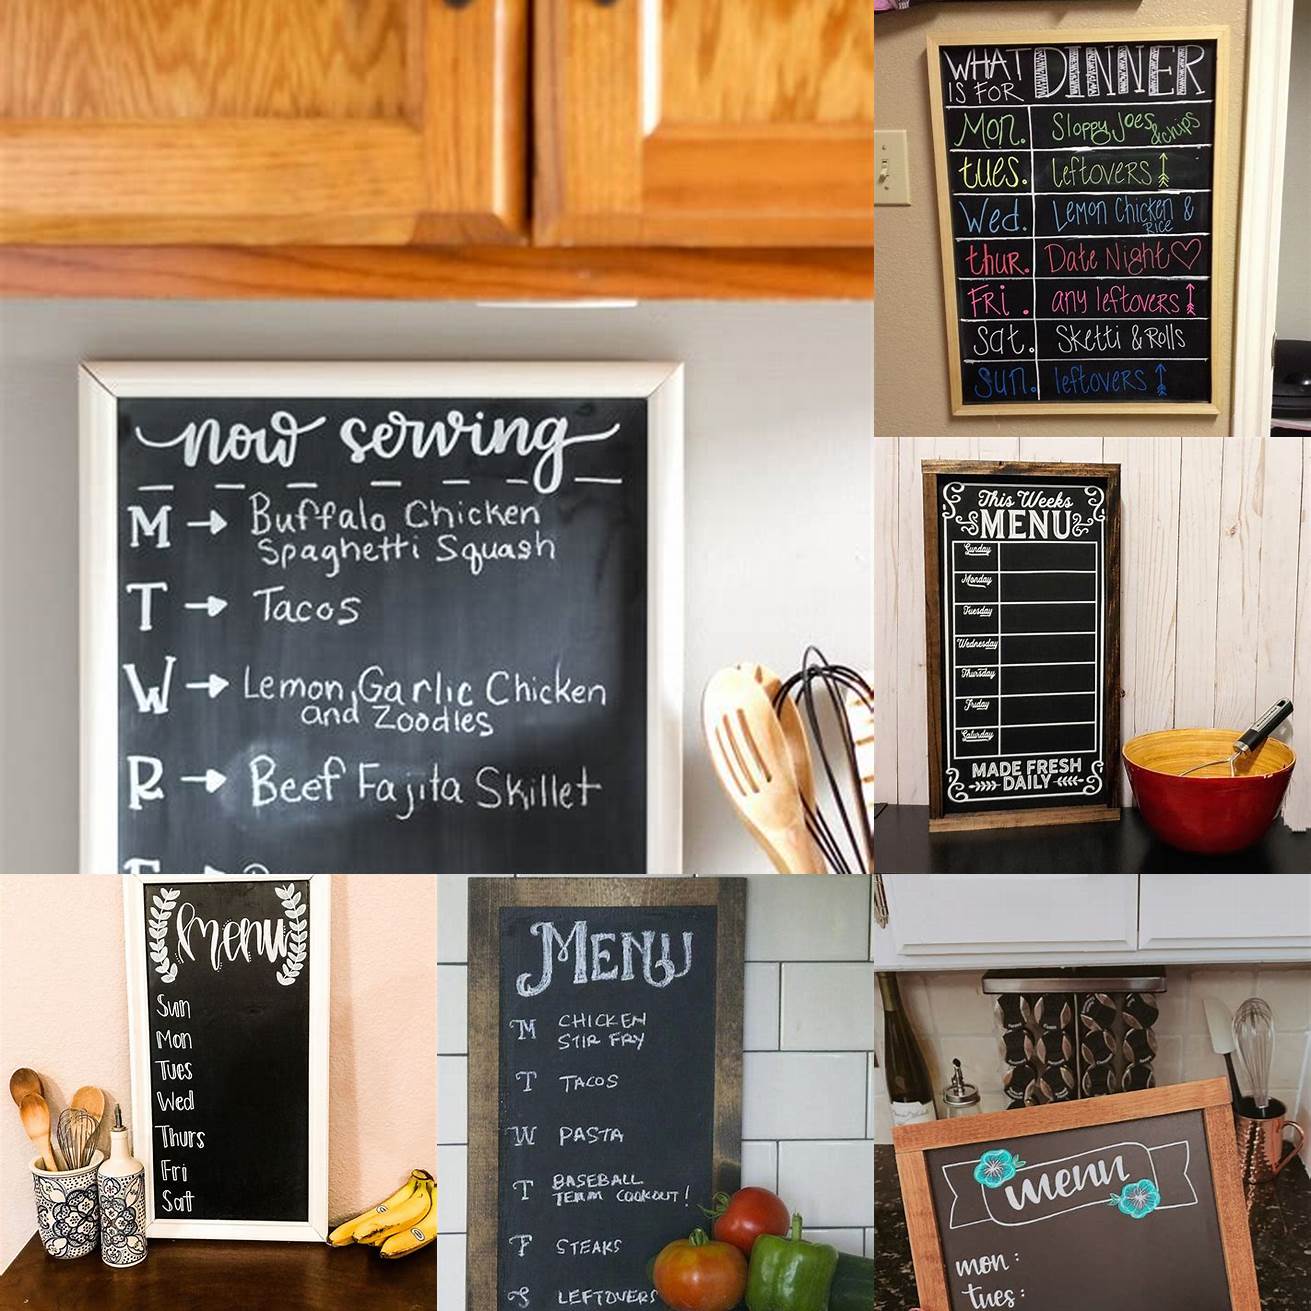 1 Meal Planning The kitchen chalkboard is a great tool for planning out your meals for the week You can write down what you plan to cook each day and make a grocery list based on the ingredients needed